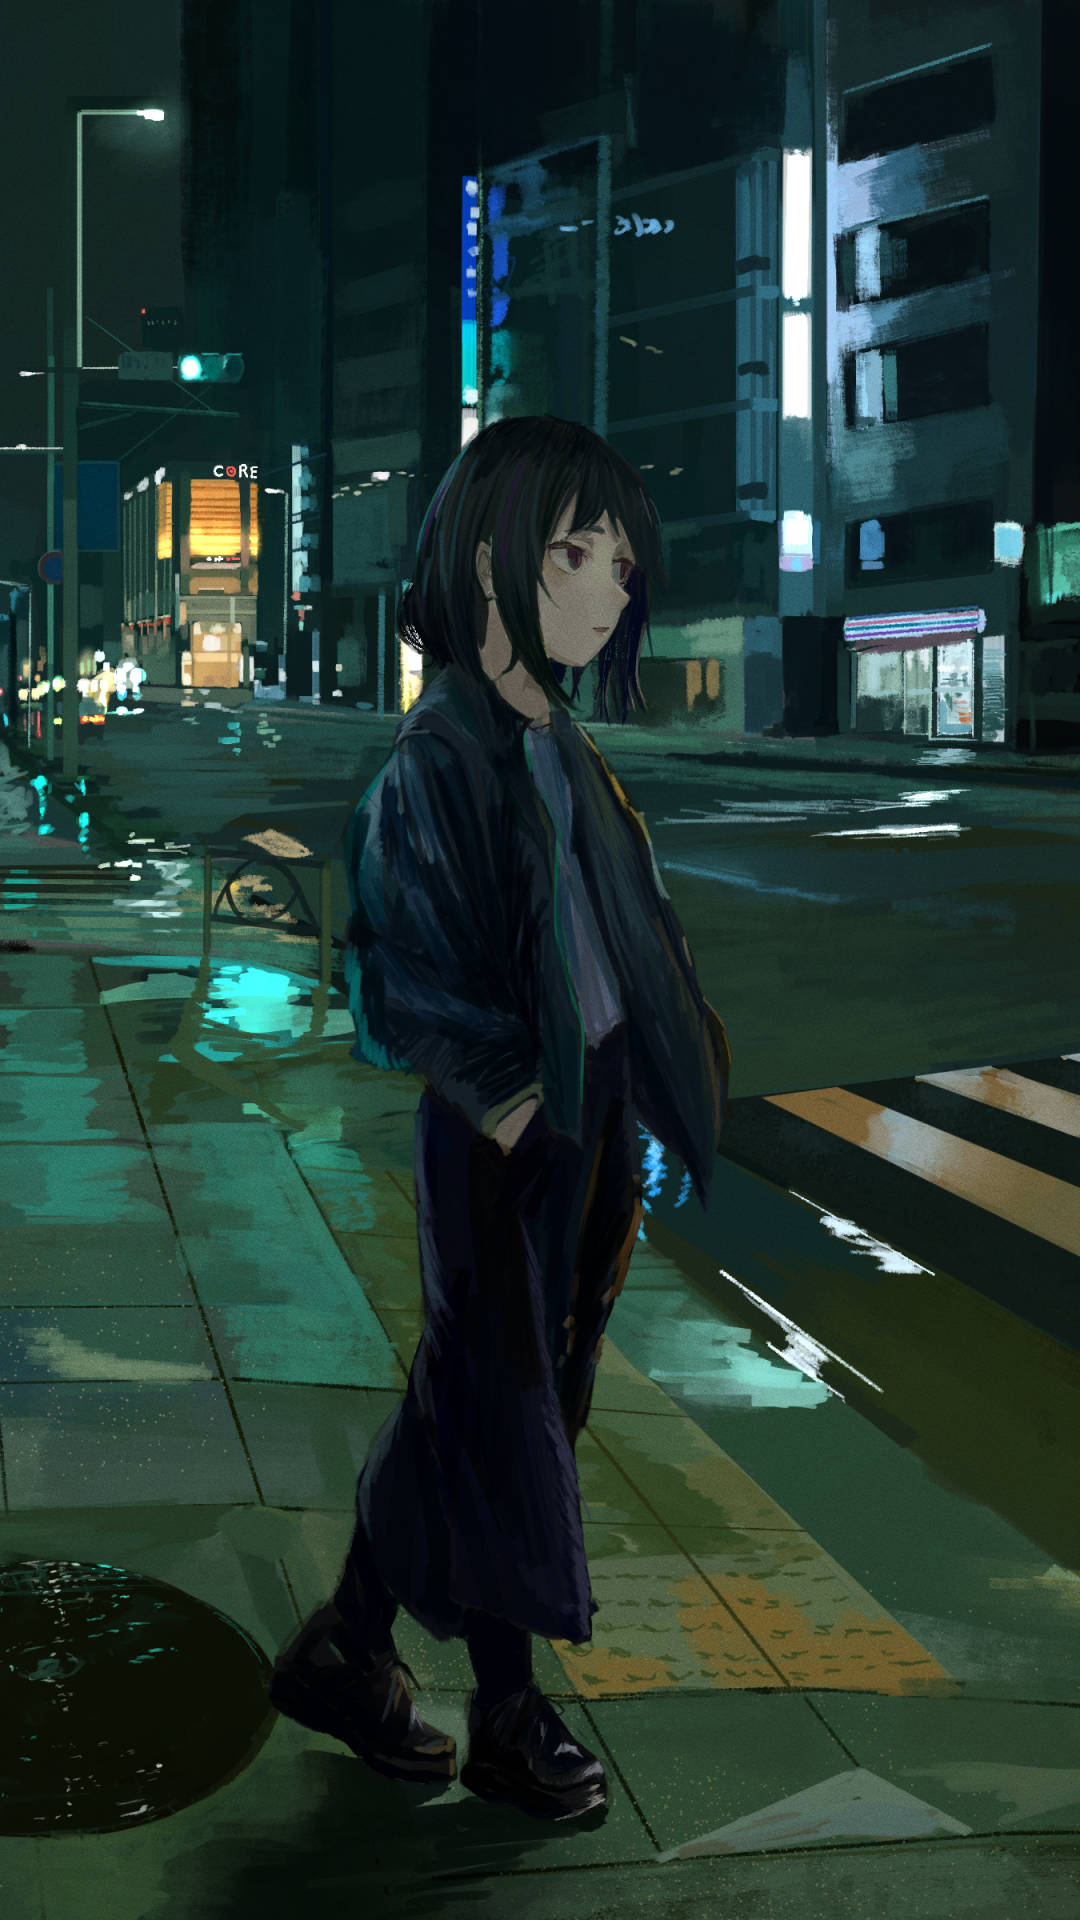 a girl standing on a street at night Wallpaper